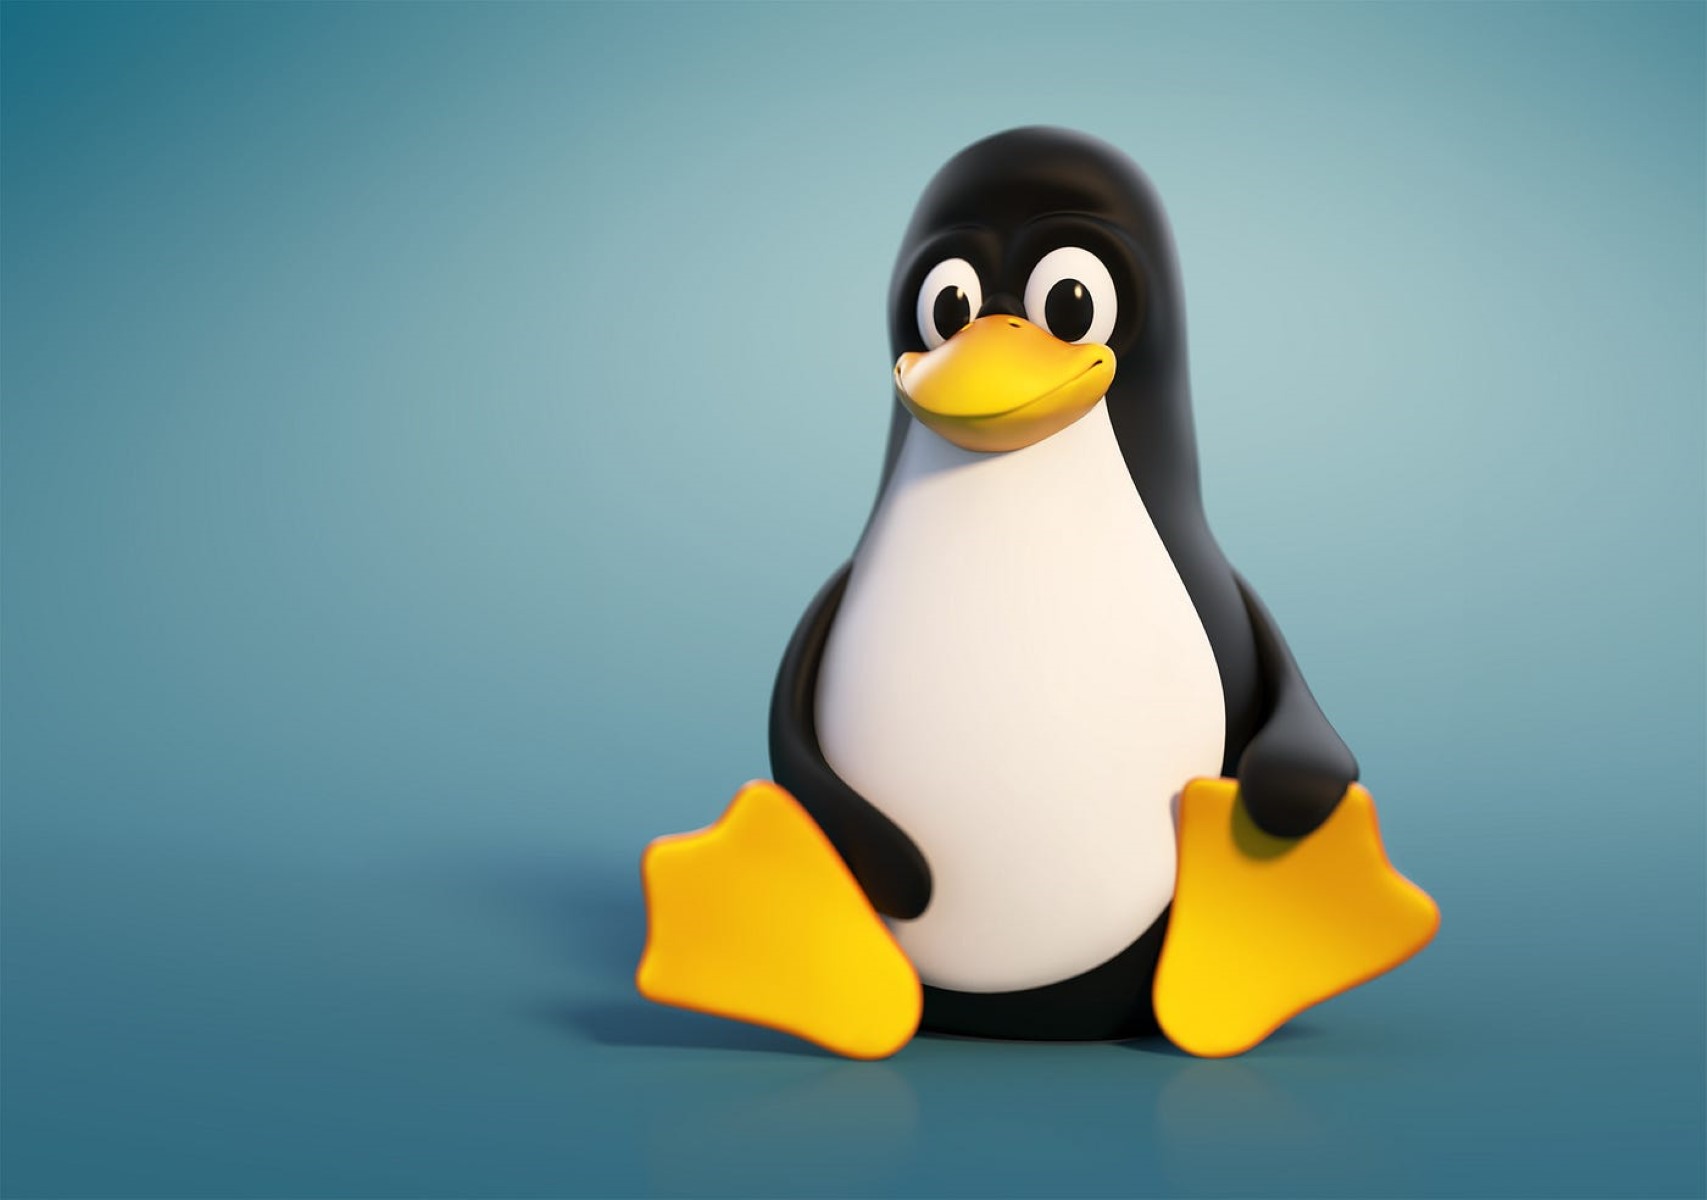 What Is The Name Of The Built-In Firewall On Most Linux Distributions?